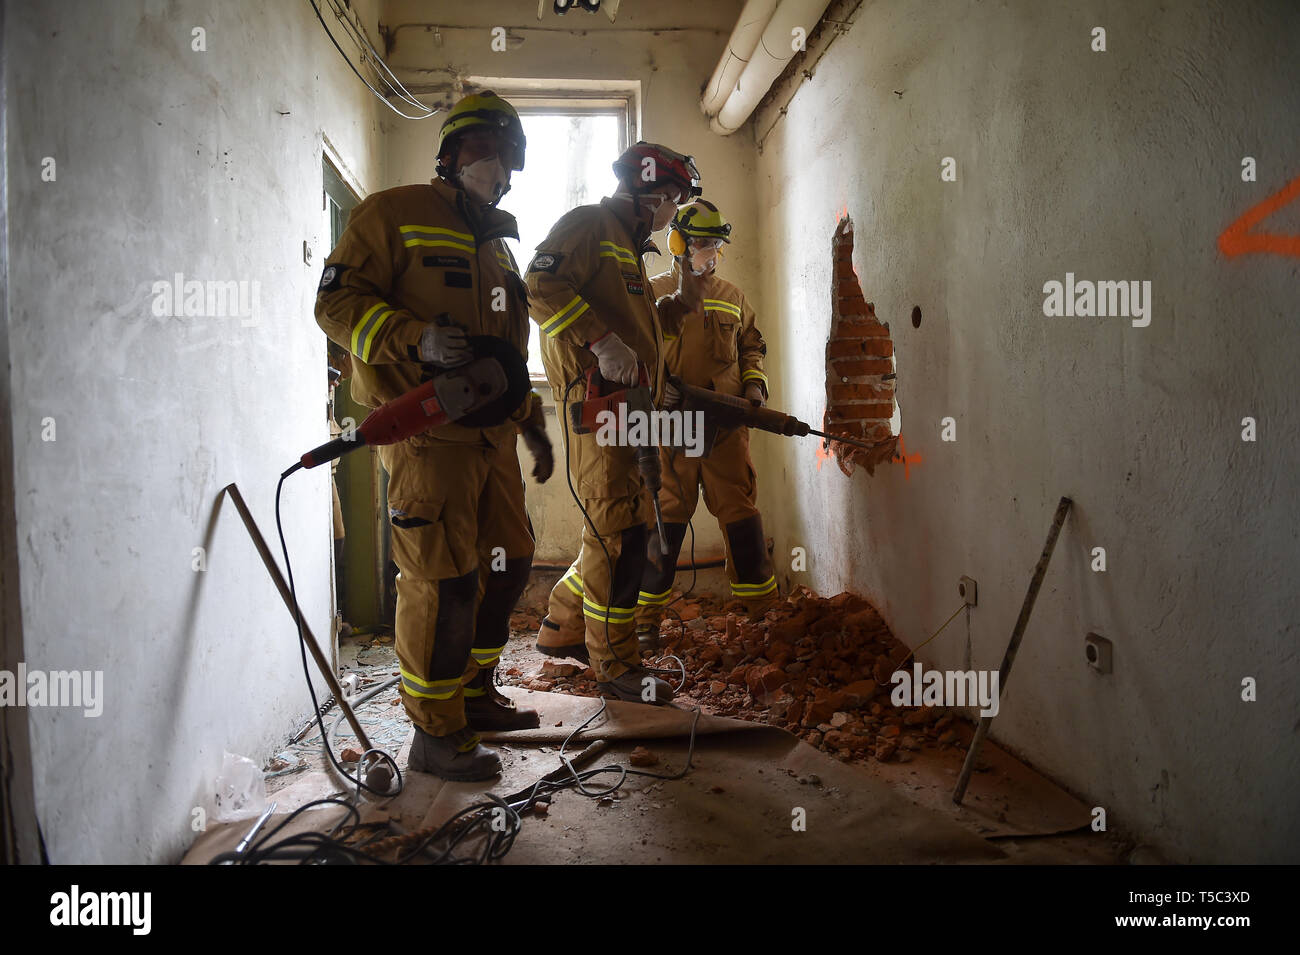 BUCHAREST, ROMANIA - APRIL 10, 2019: Emergency rescue team in action during the most complex medical exercise in the history of NATO, Vigorous Warrior Stock Photo